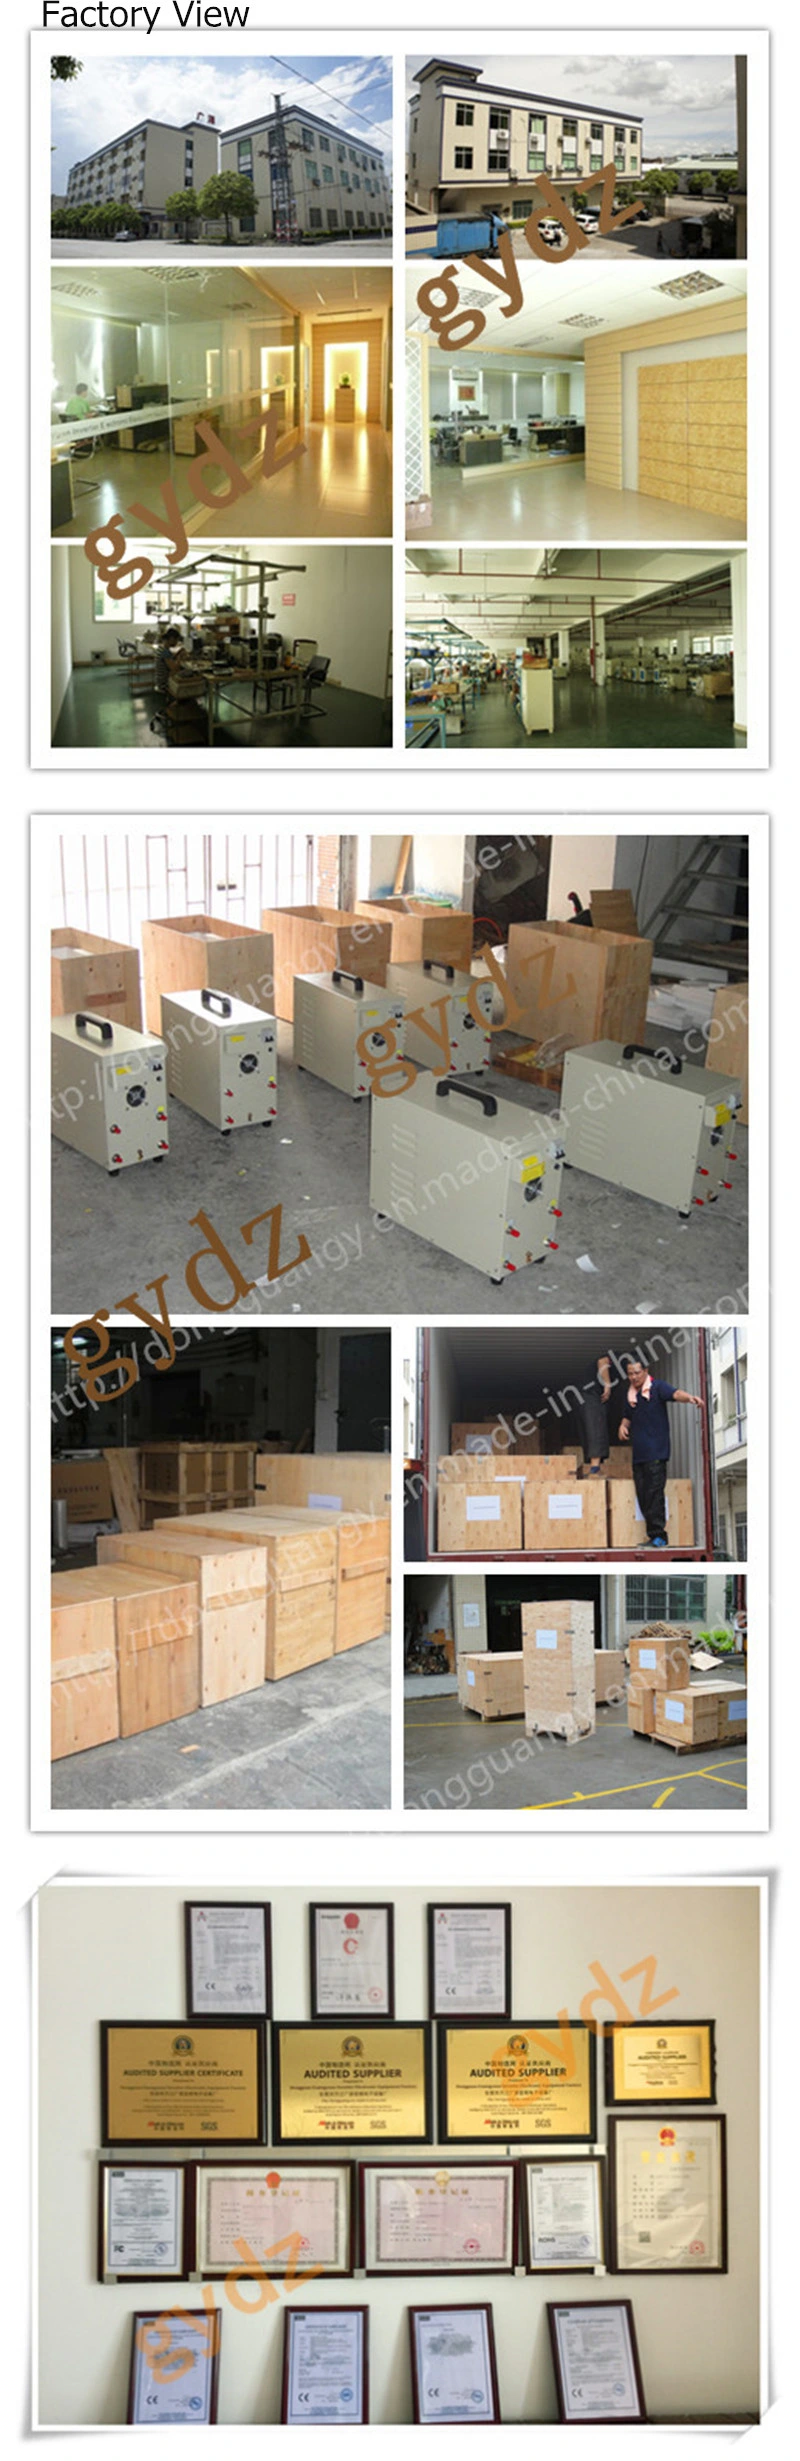 Electric Industrial Induction Heater Manufacture in China for Sale (25KW~60KW)